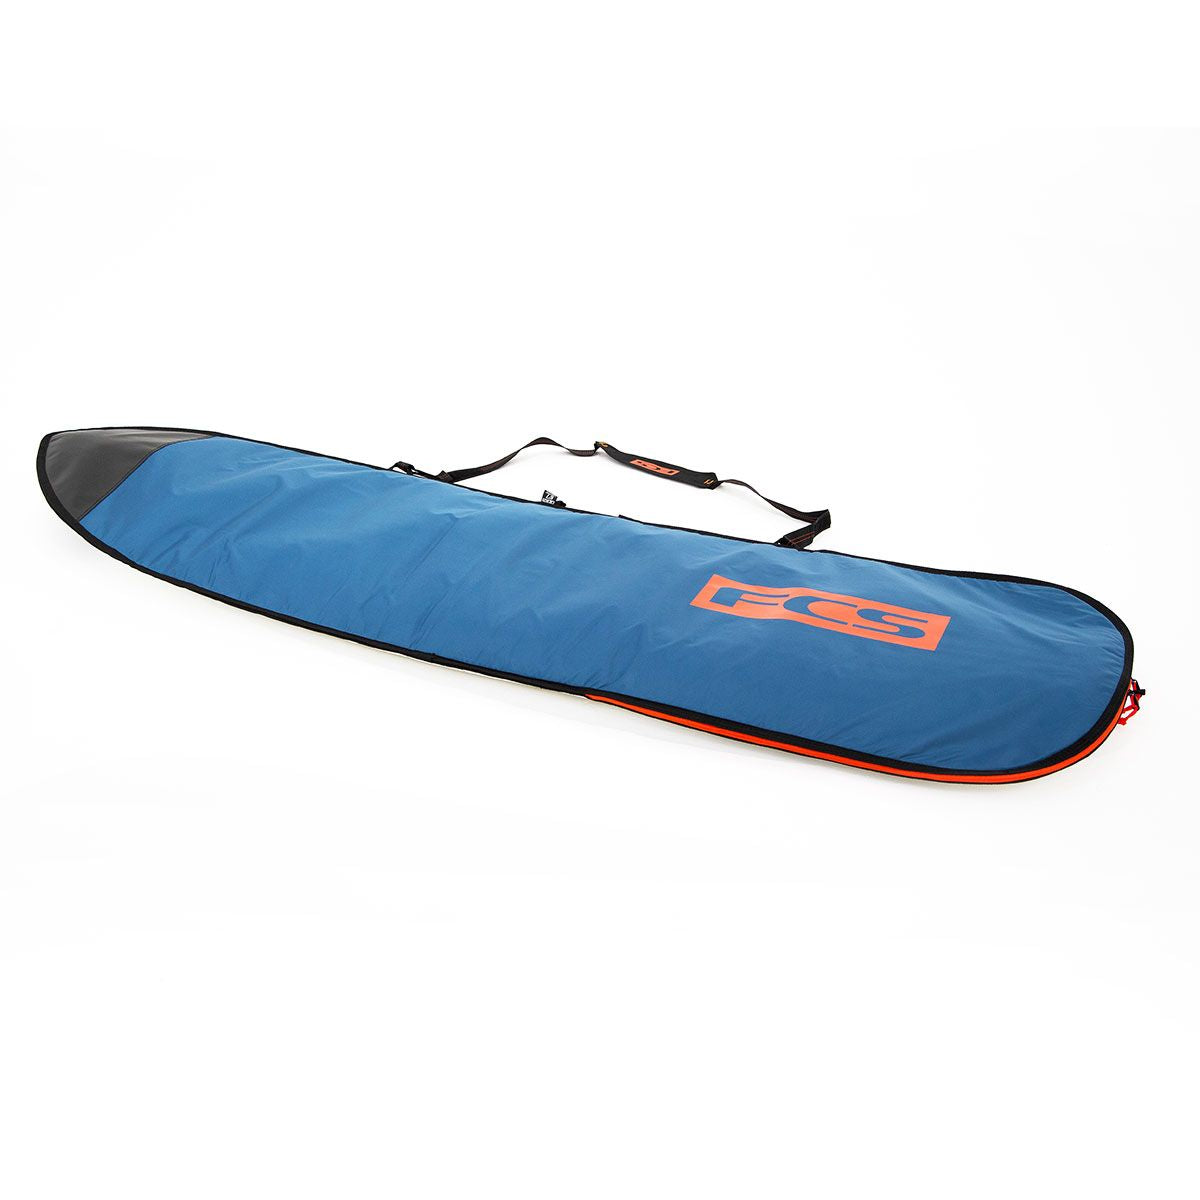 The Importance of Paddle Board Bags | Blog | ISLE Paddle Boards